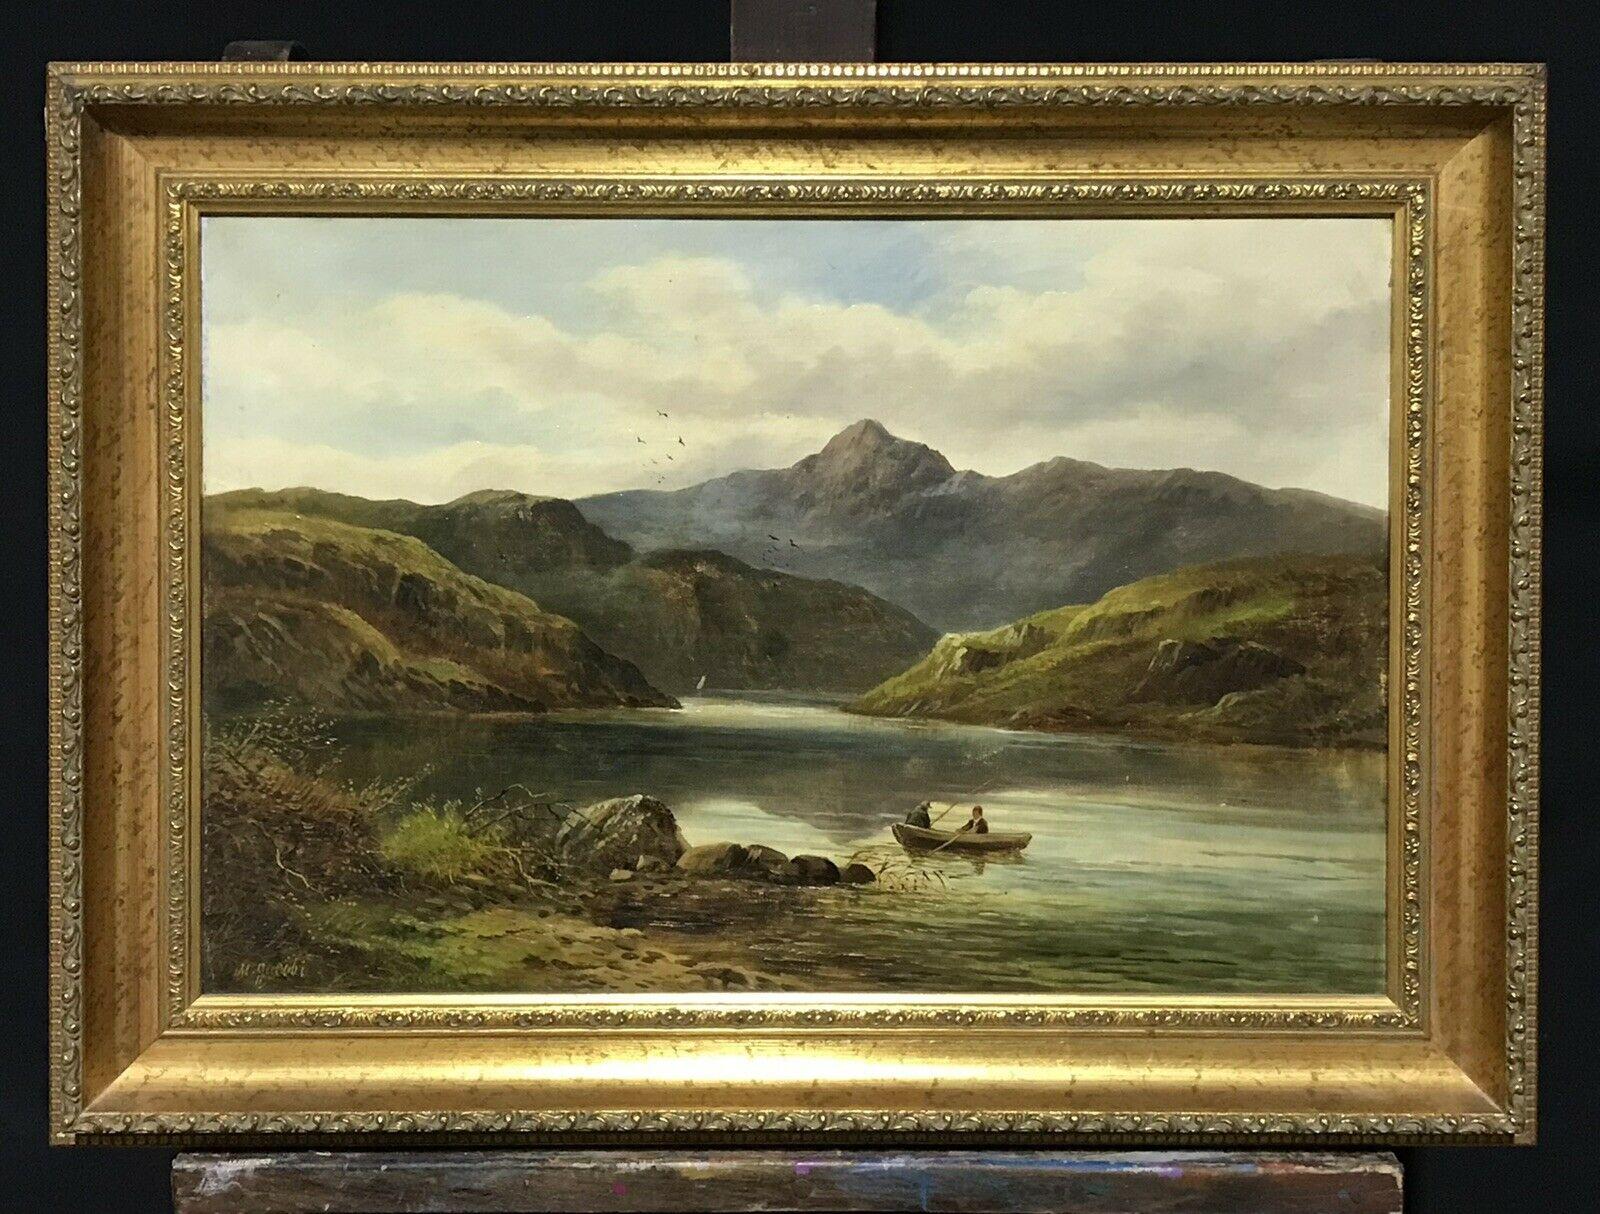 FINE VICTORIAN SIGNED OIL - SNOWDON NORTH WALES - ANGLERS IN BOAT LAKE SCENE - Painting by Martin Jacobi